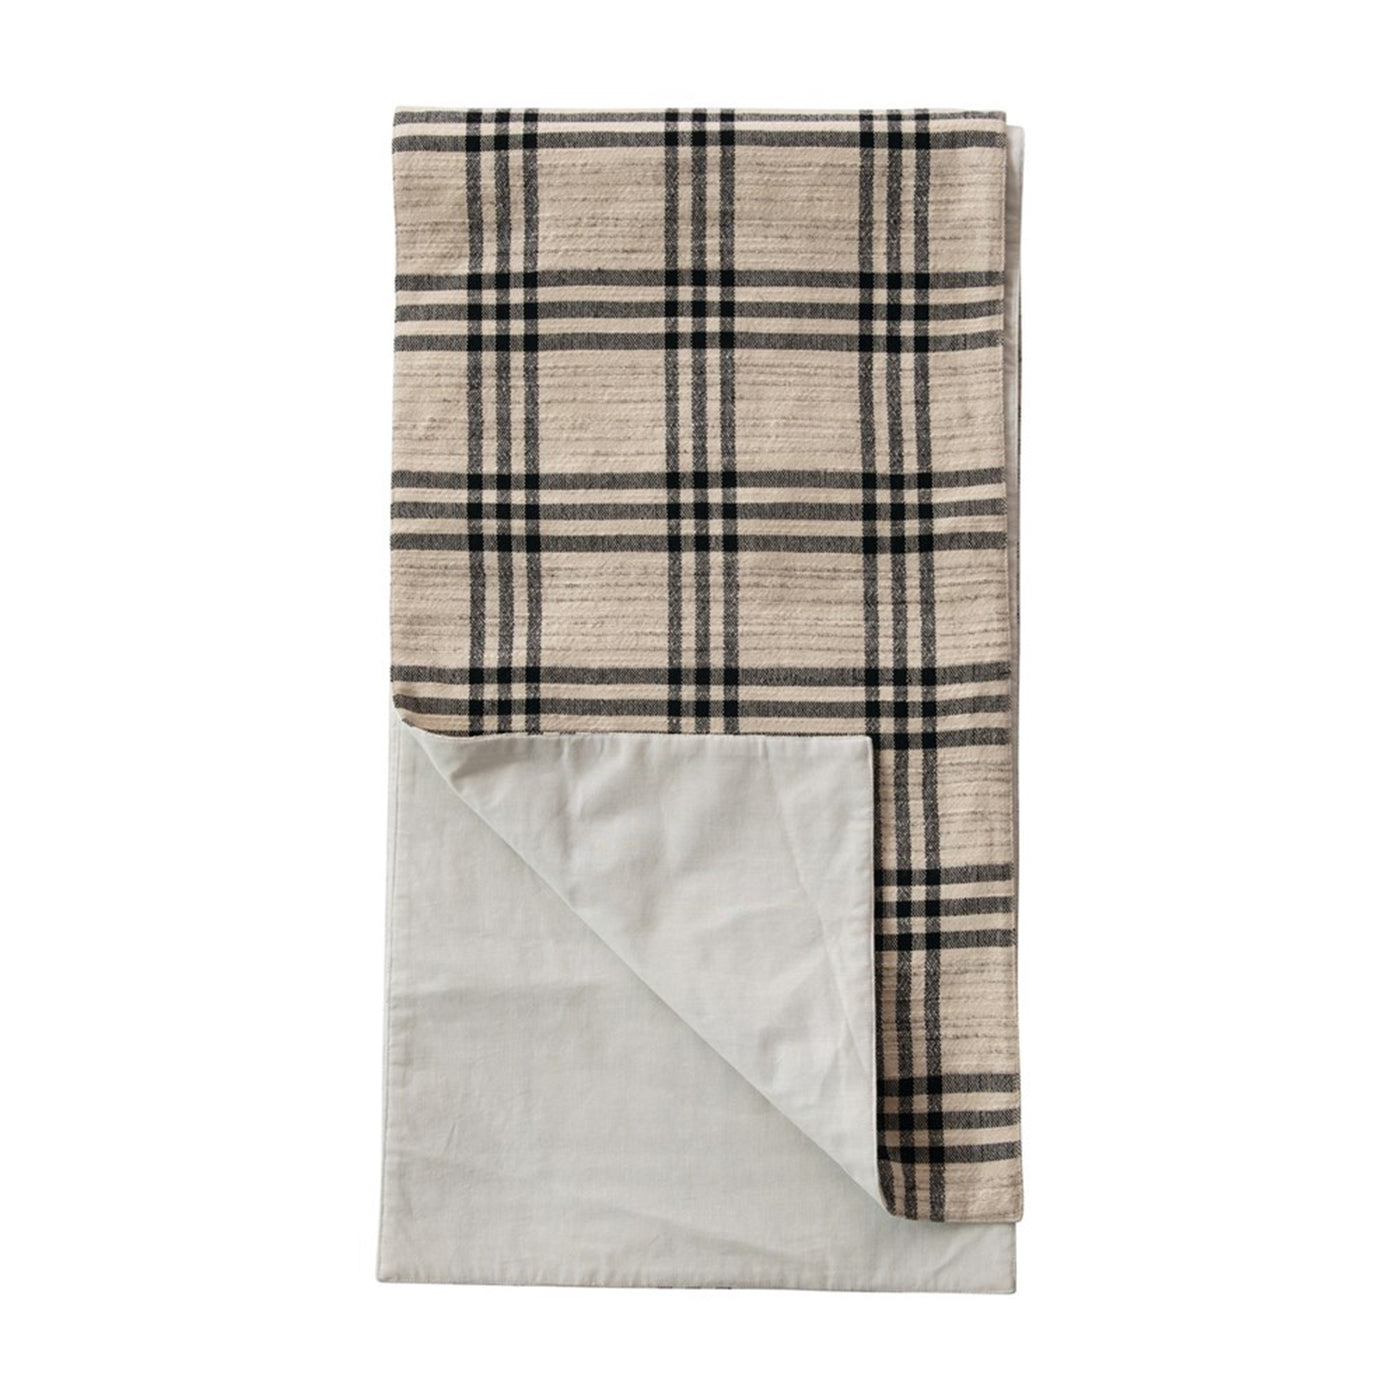 Black Plaid Woven Cotton & Wool Table Runner